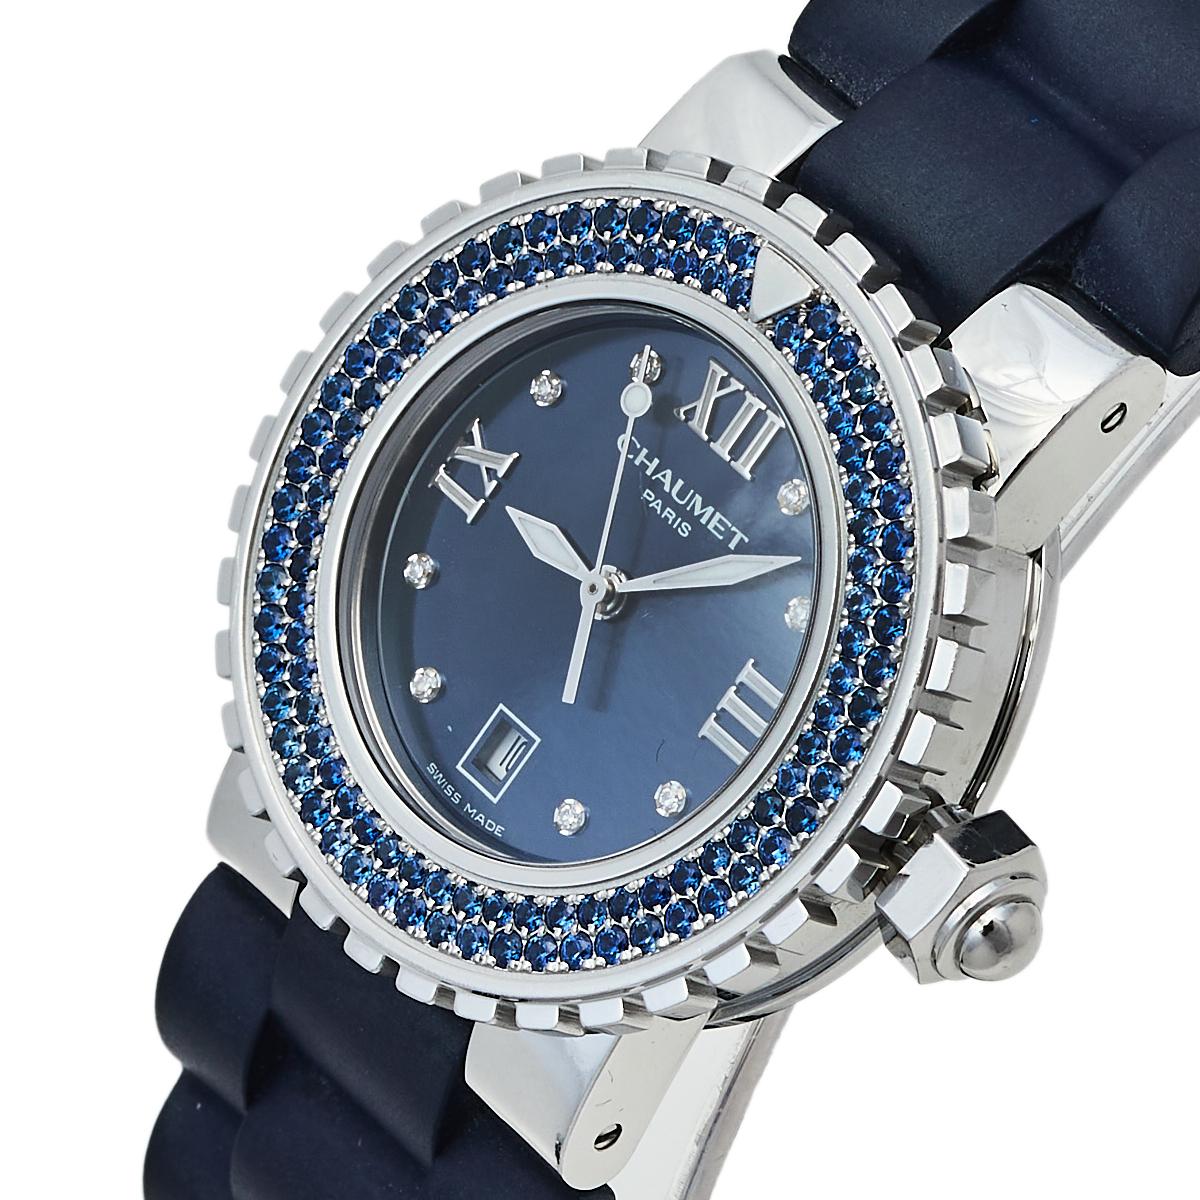 Created with precision and in true worship of the art of watchmaking, this Class One watch is from Chaumet, and it is their first jeweled diving watch. Meticulously made from stainless steel, the timepiece has a blue dial with Roman numerals and dot